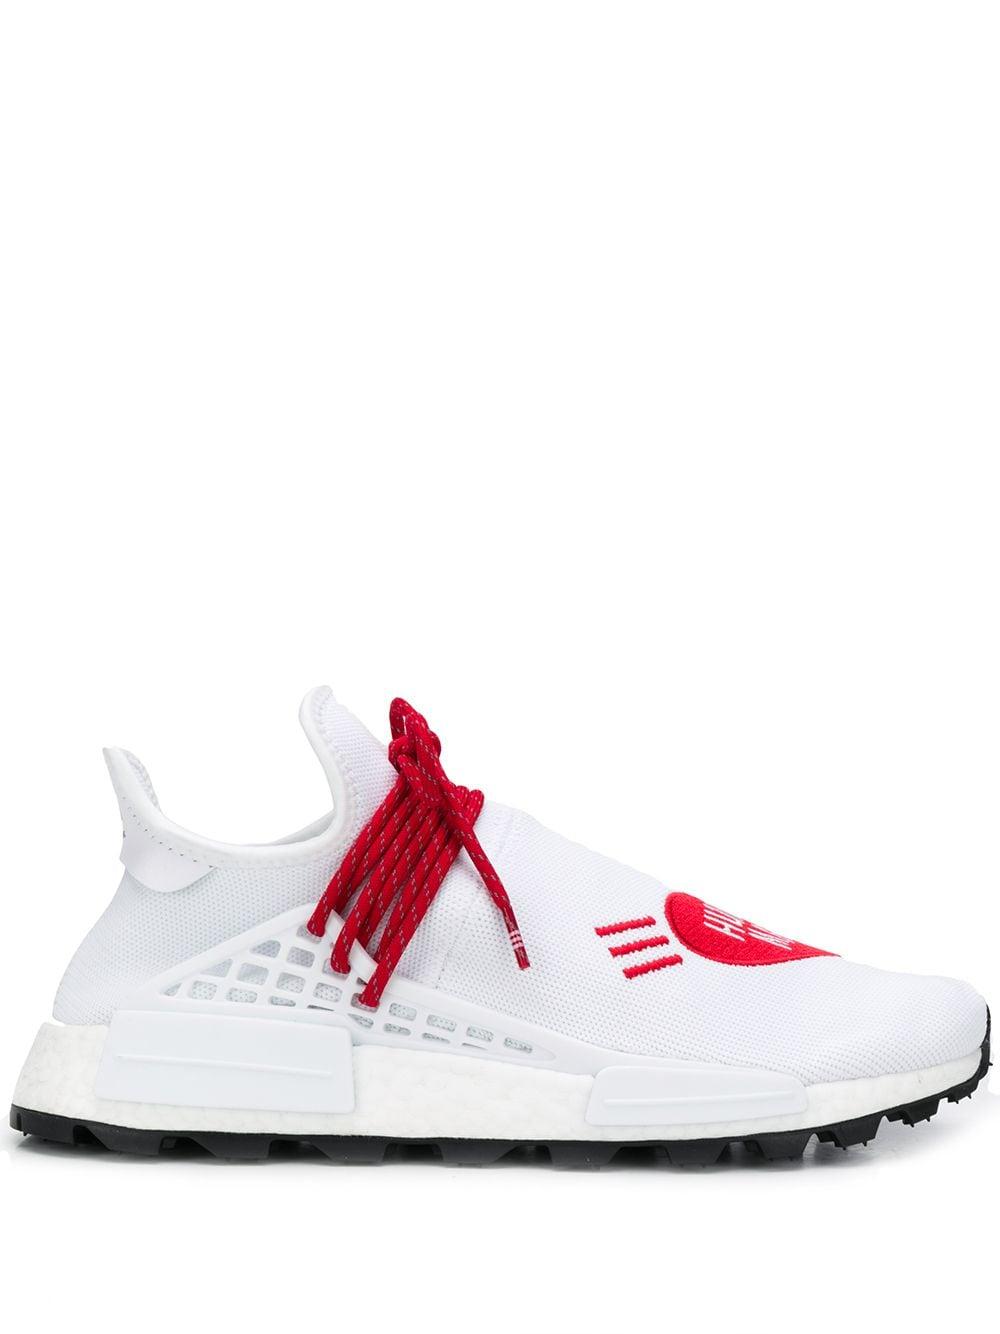 adidas Originals Synthetic Nmd Hu Human Made Boost Sneakers in White ...